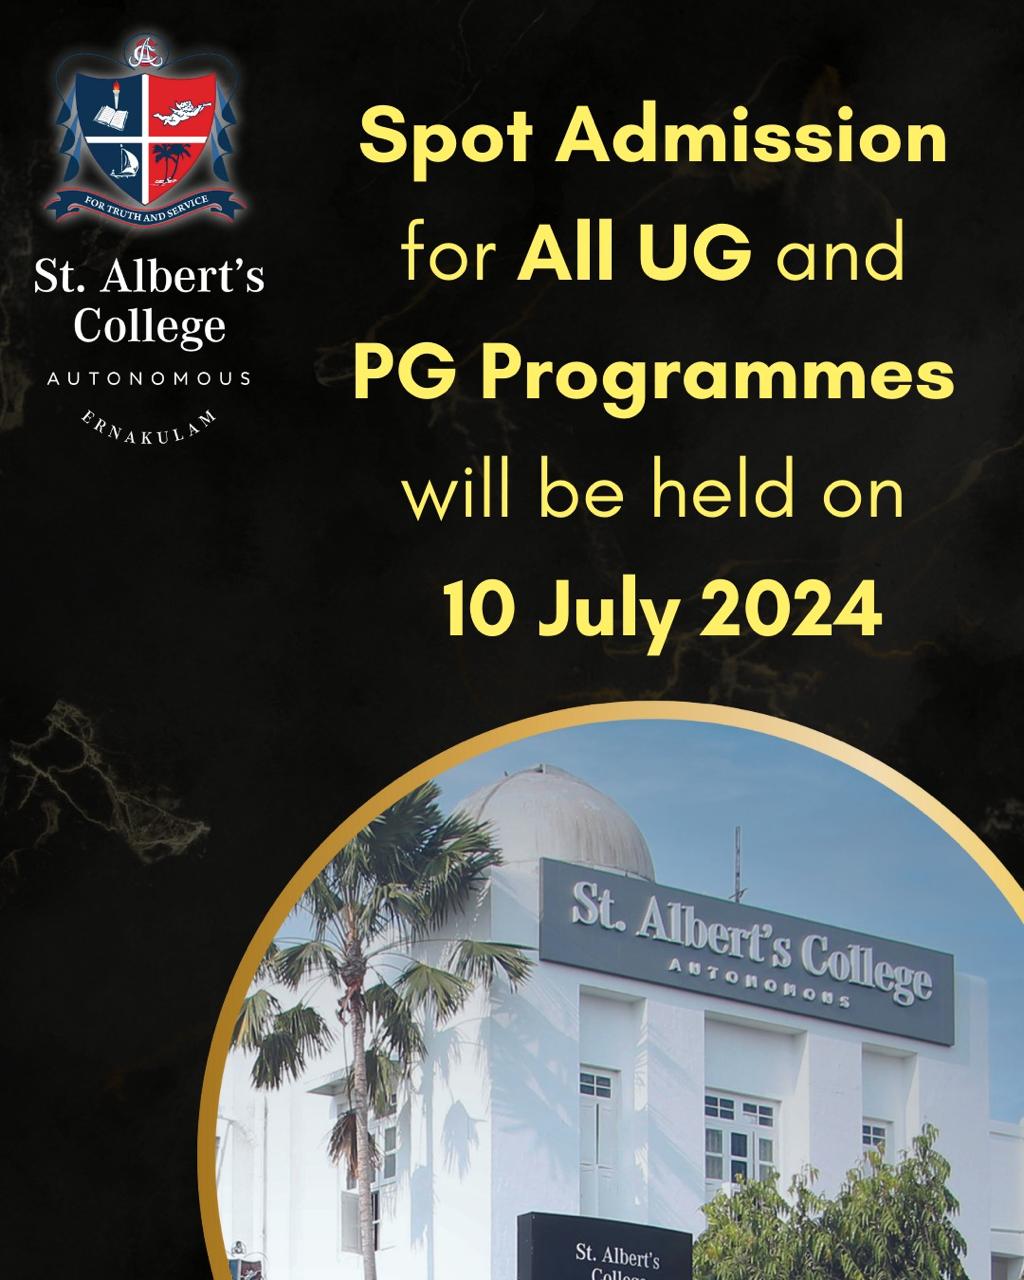 Spot Admission for All UG and PG Programmes.